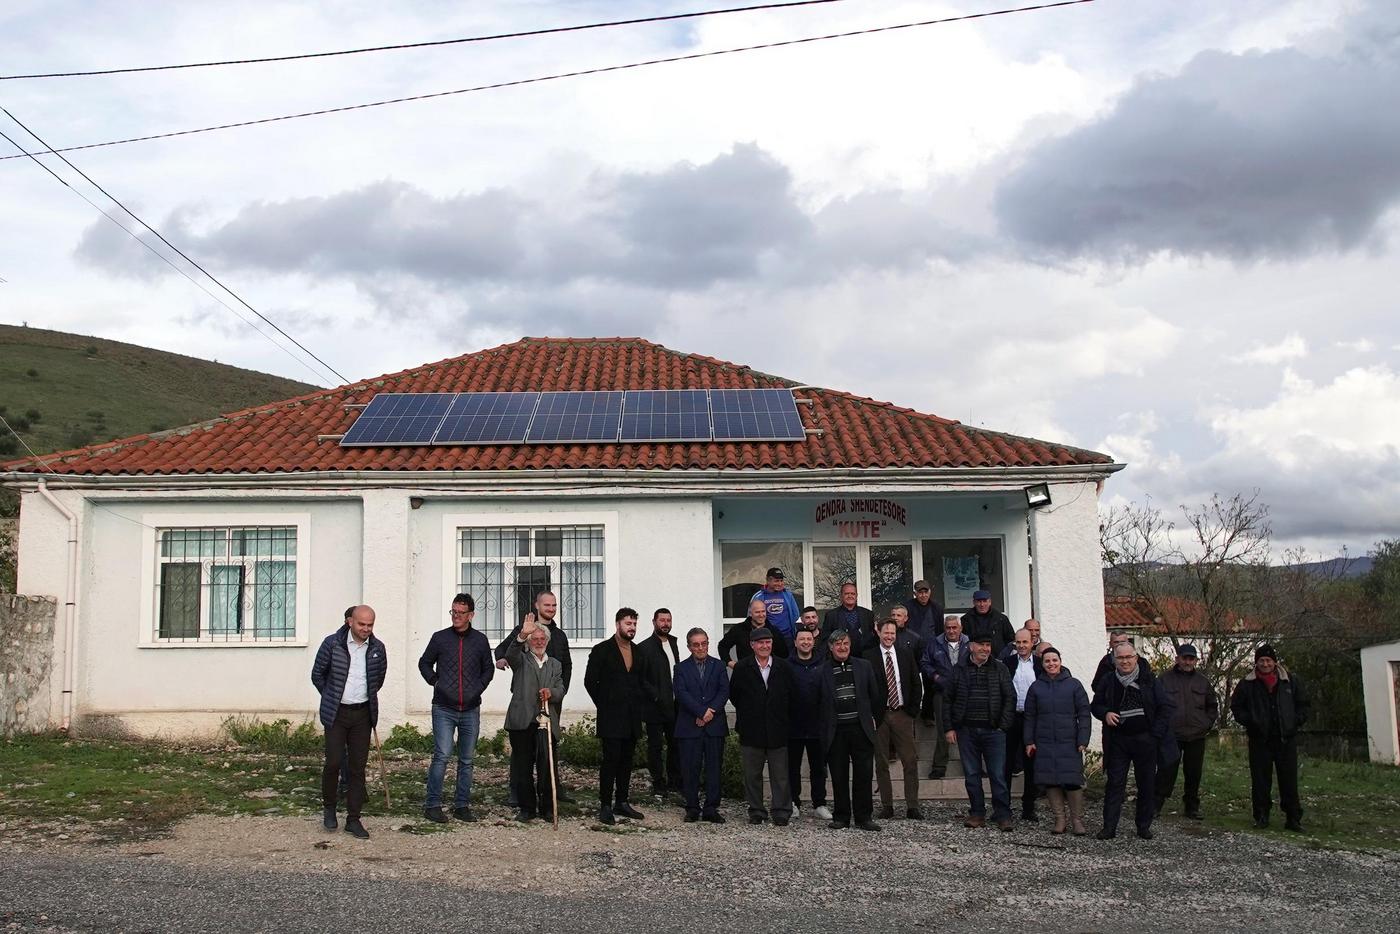 People in front of a house with a solar roof